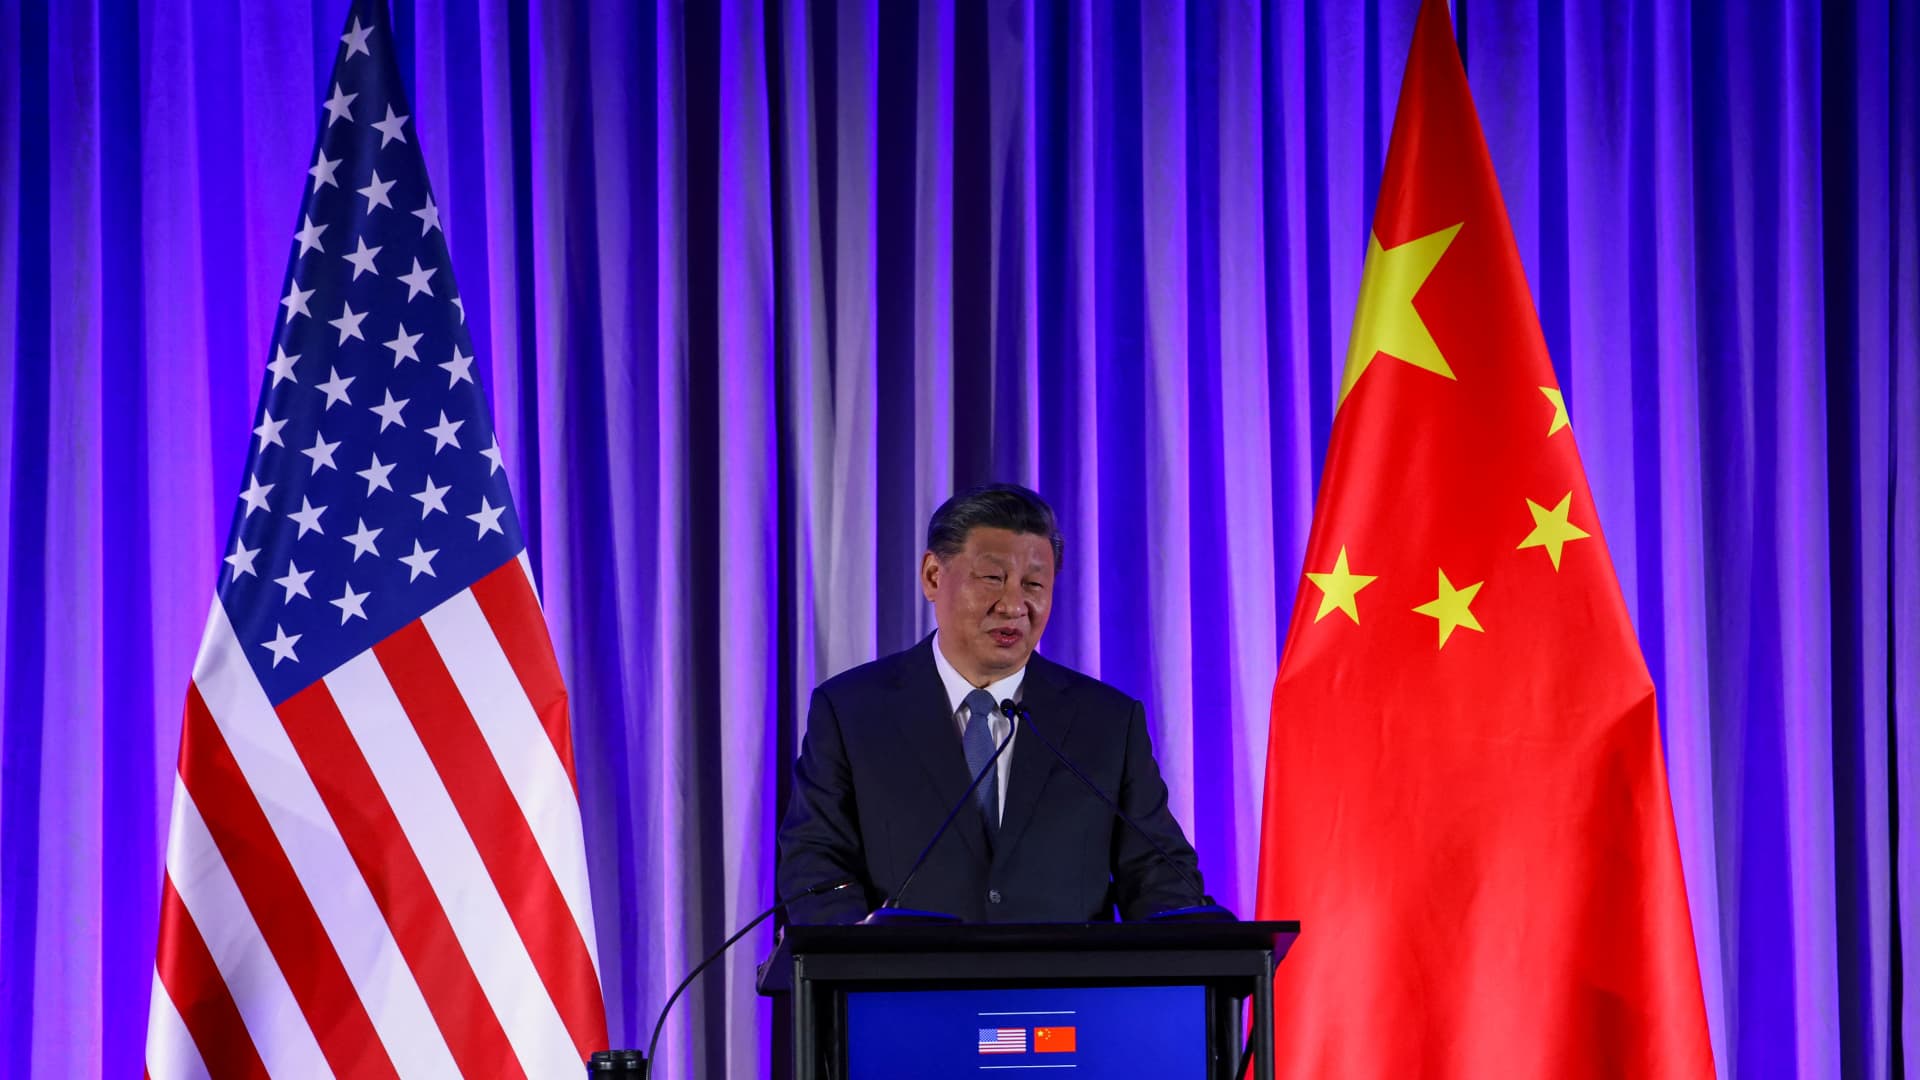 U.S. and China trade bloc divisions threaten a ‘reversal’ for global economy